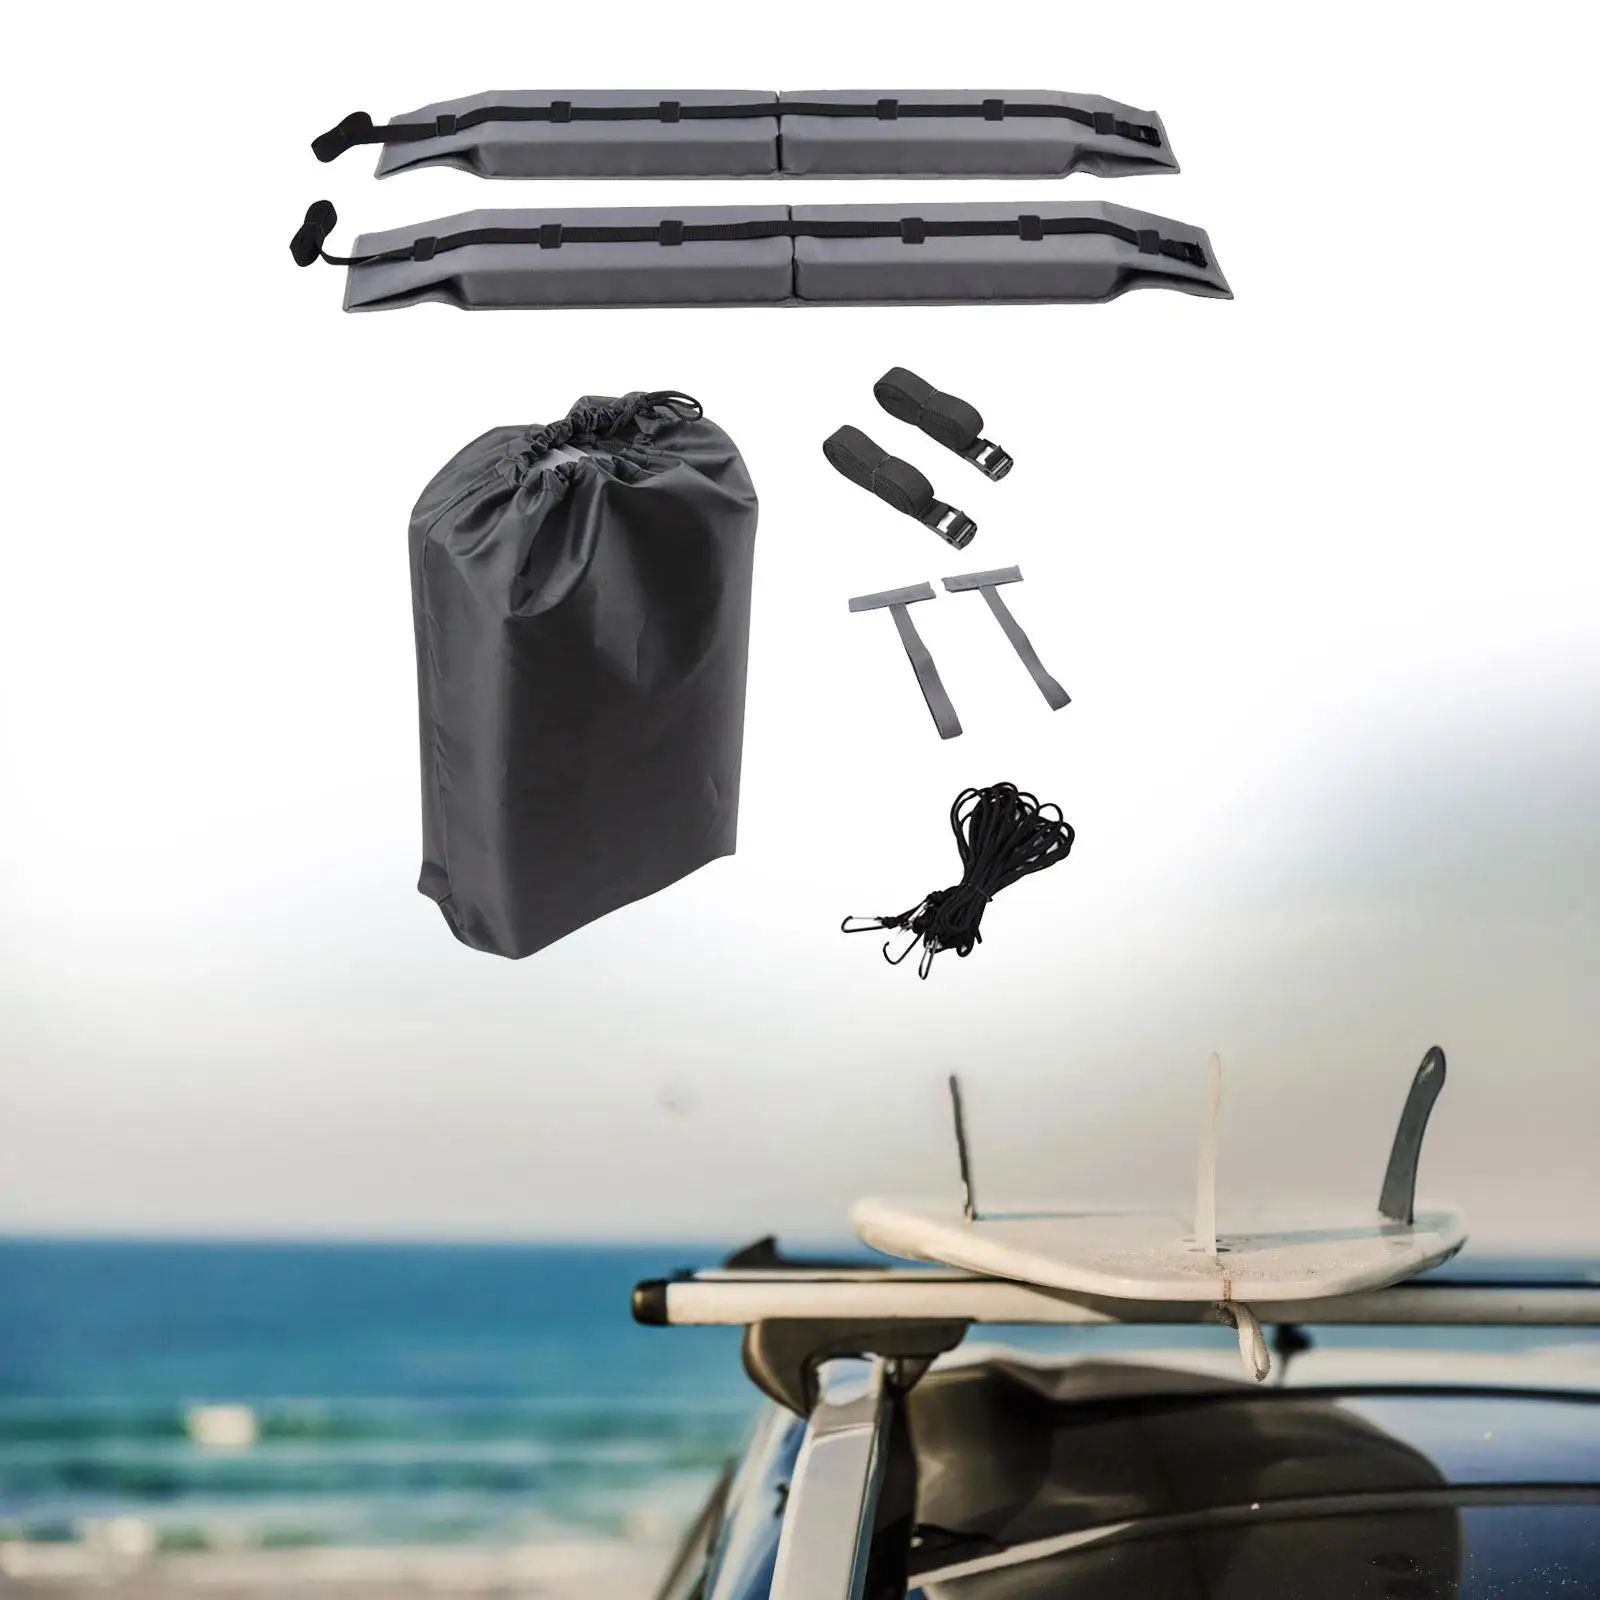 Universal Soft Roof Rack Pads for Kayak Canoe with Storage Bag 600D Oxford Cloth and EVA Foam 15ft Tie Down Straps Durable